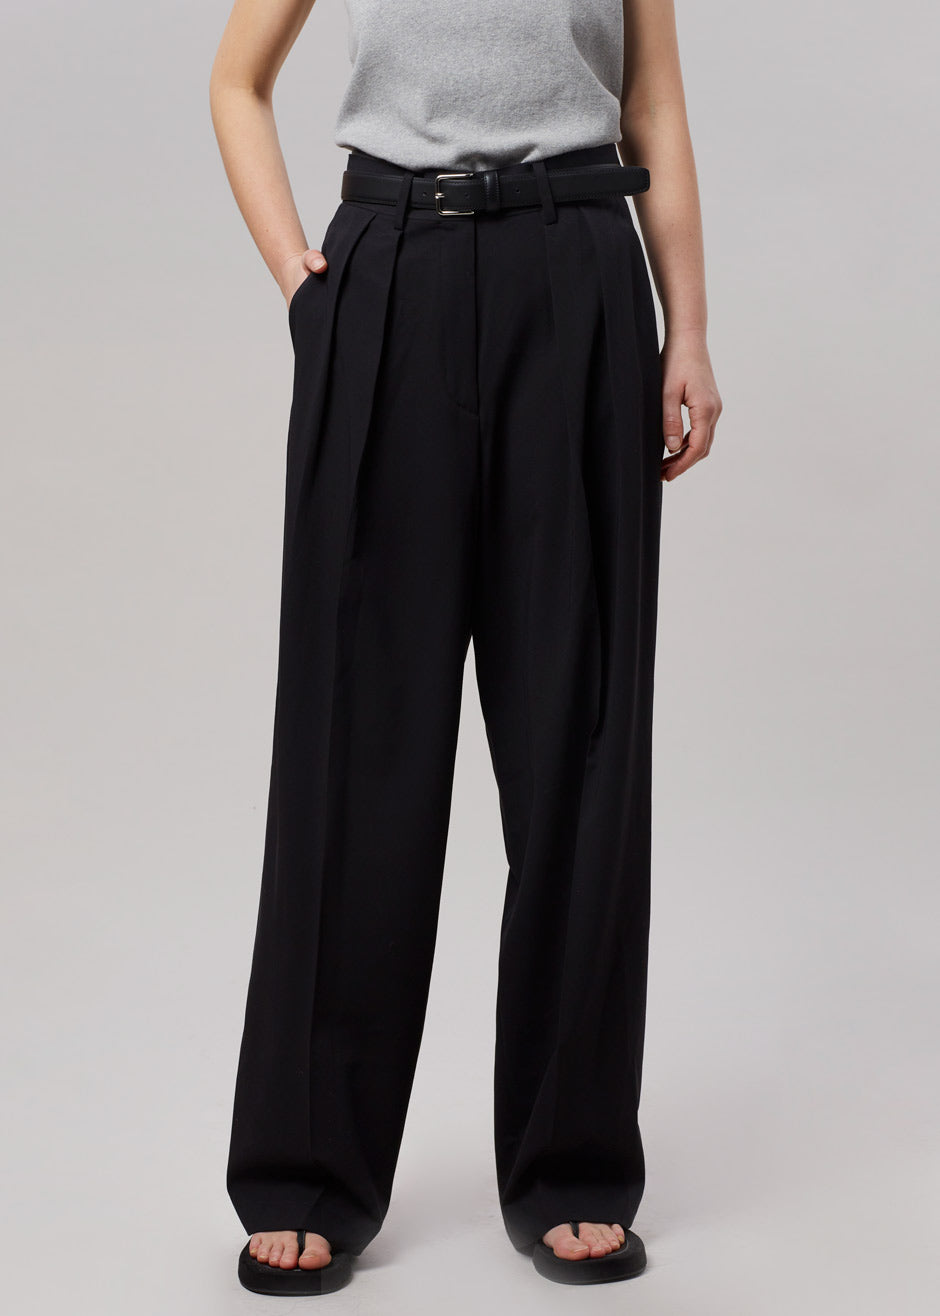 Tansy Pleated Trousers - Black - 4